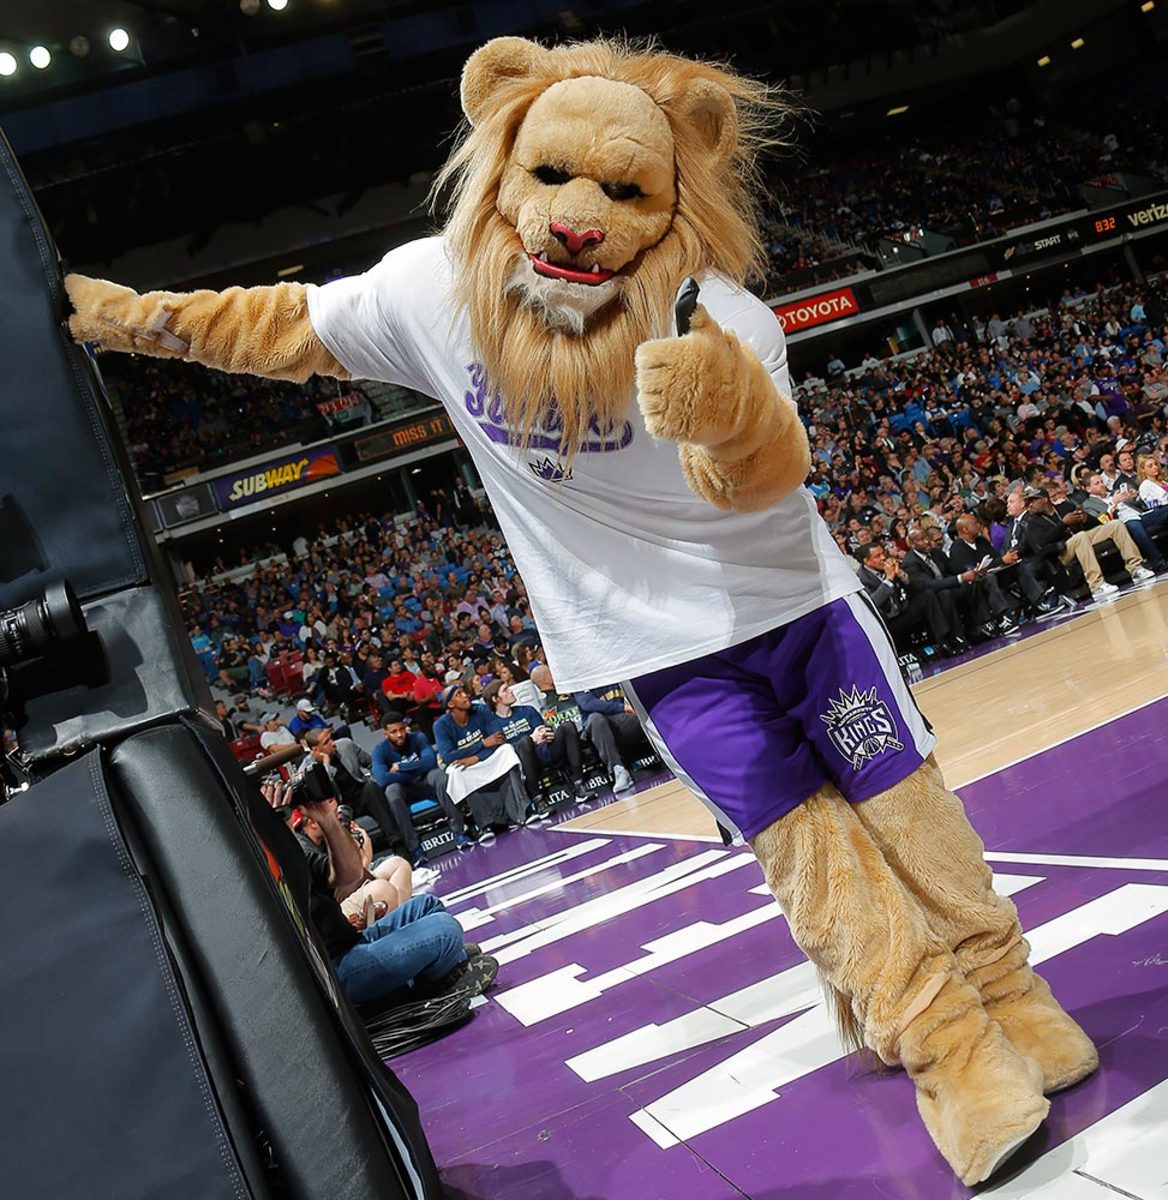 Top 10 Best NBA Mascots of all time – Ranked by Popularity and